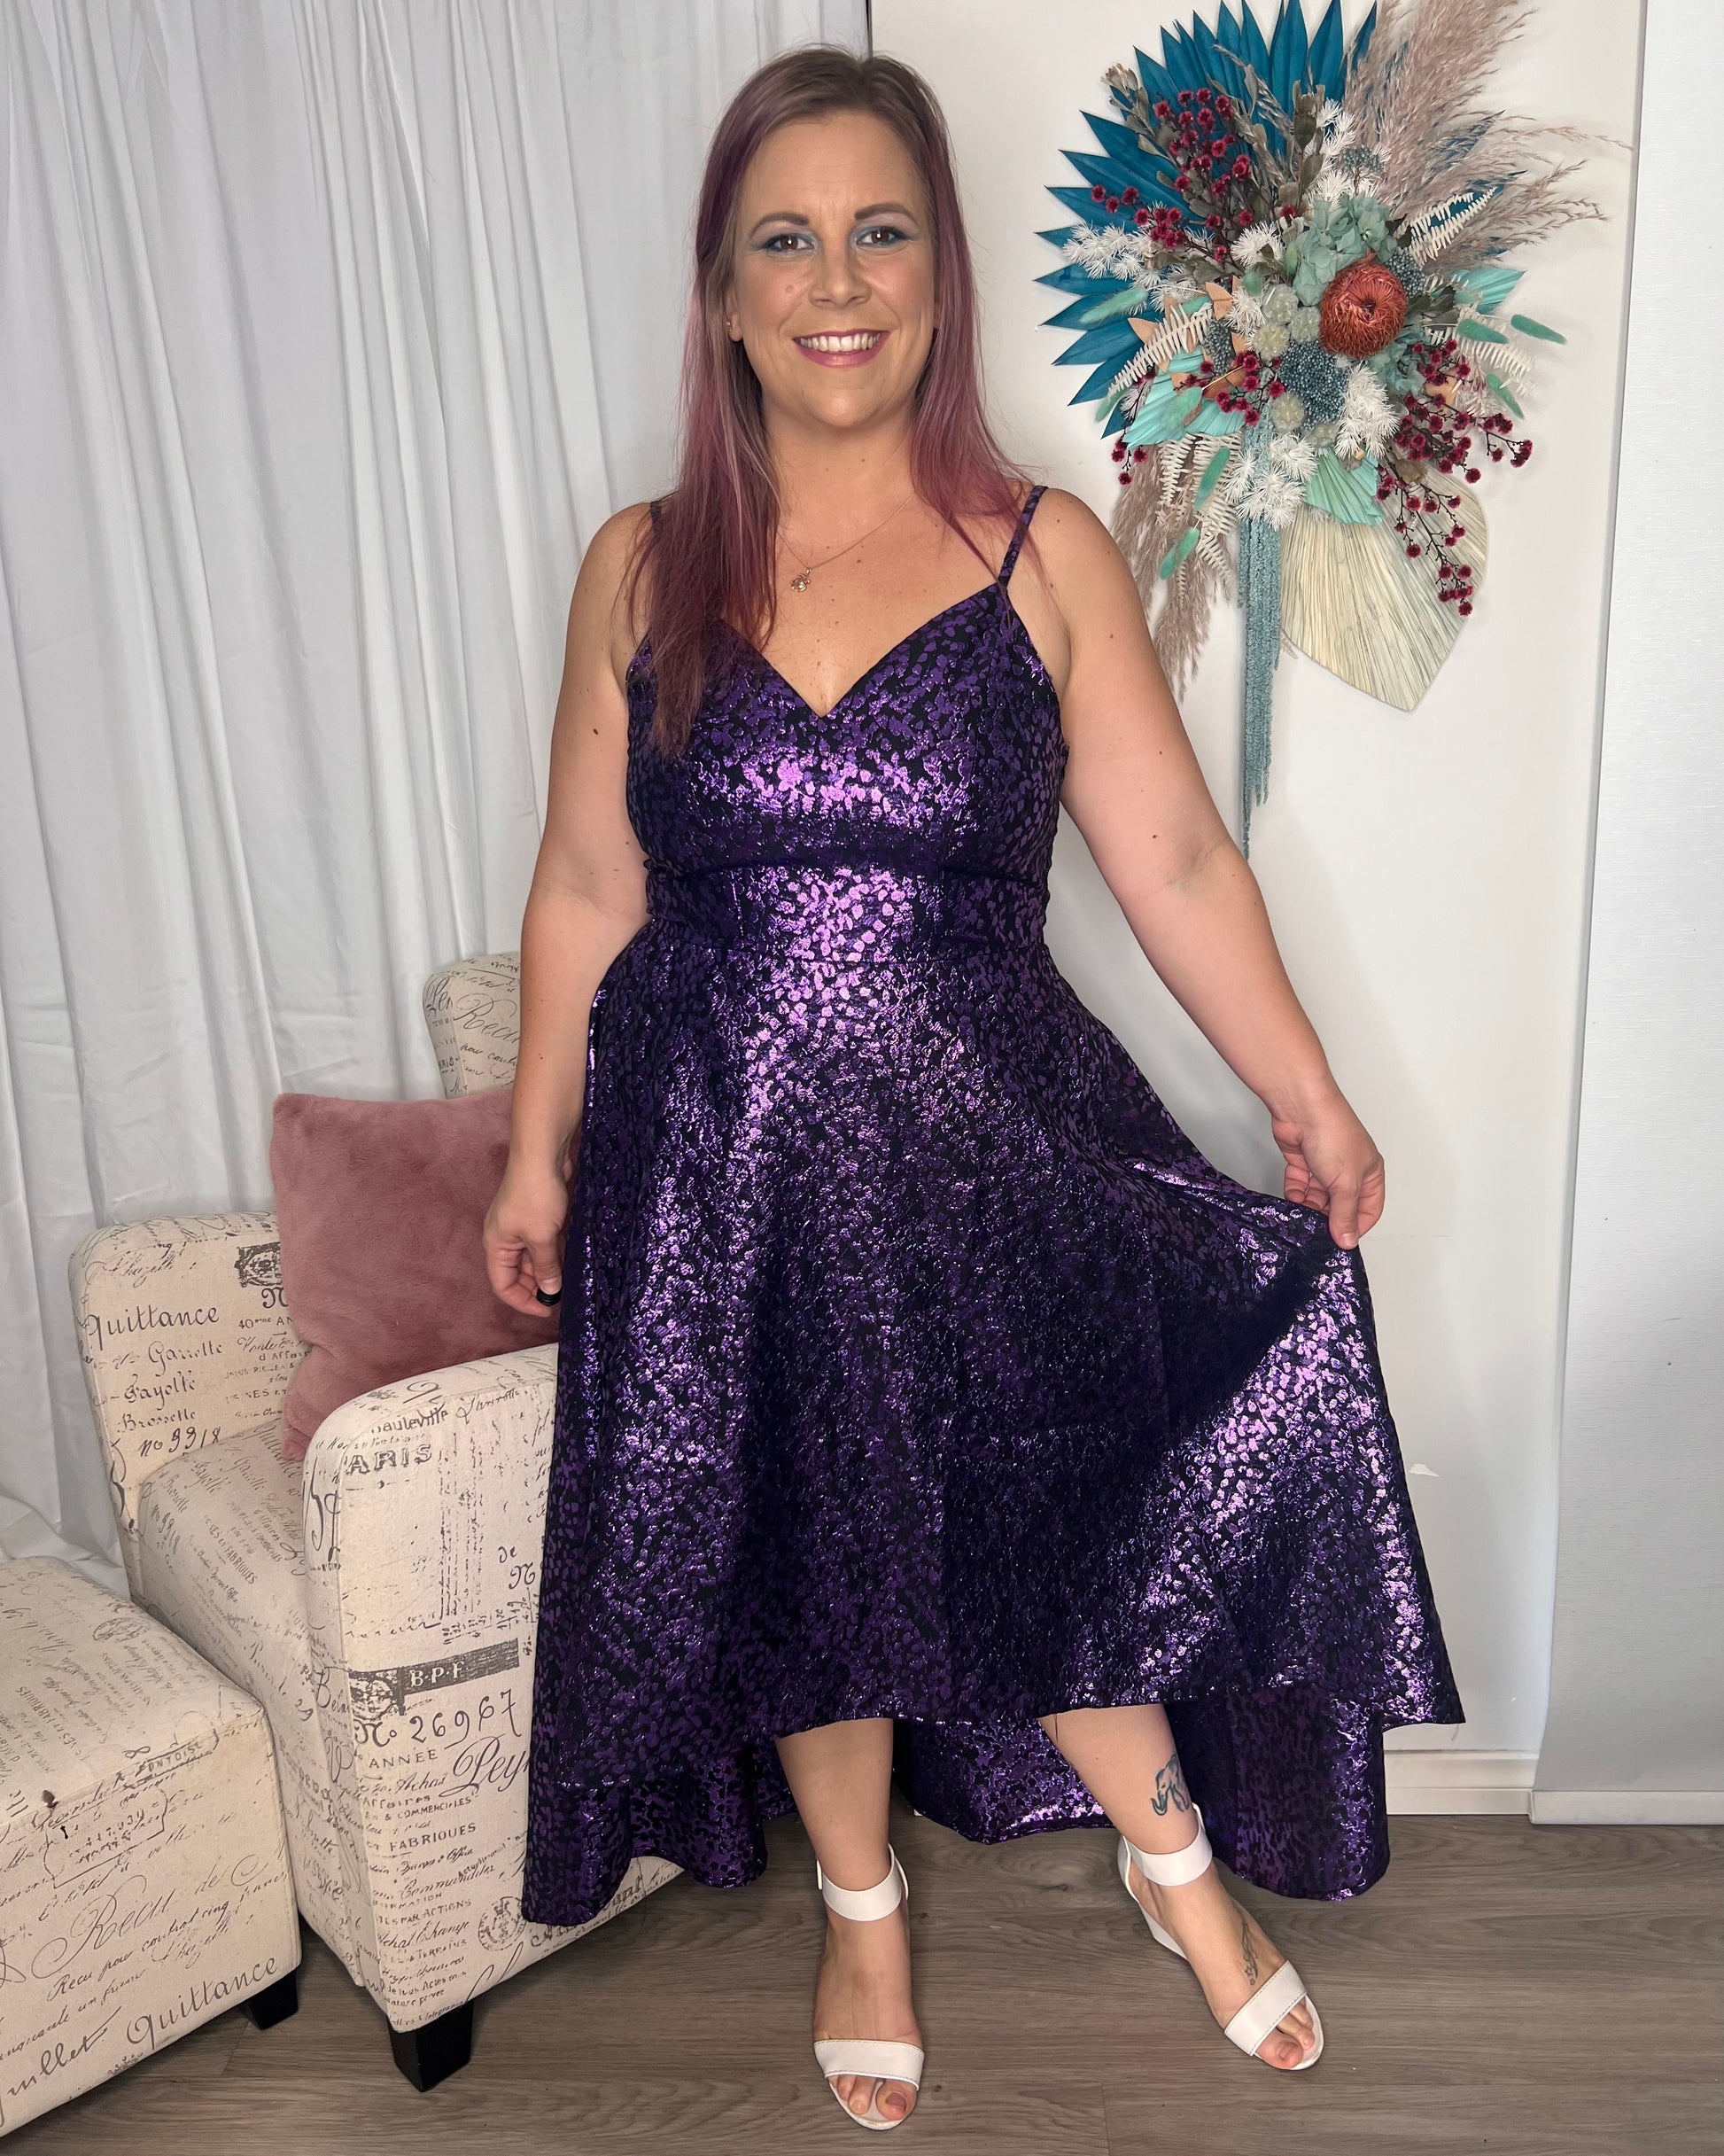 Aubrey Foil Print Cocktail Dress: The Aubrey Dress is sure to turn heads at your next evening event, with the foil print throwing just a hint of sass. It is a high low style dress with a structure to - Ciao Bella Dresses - Goddiva